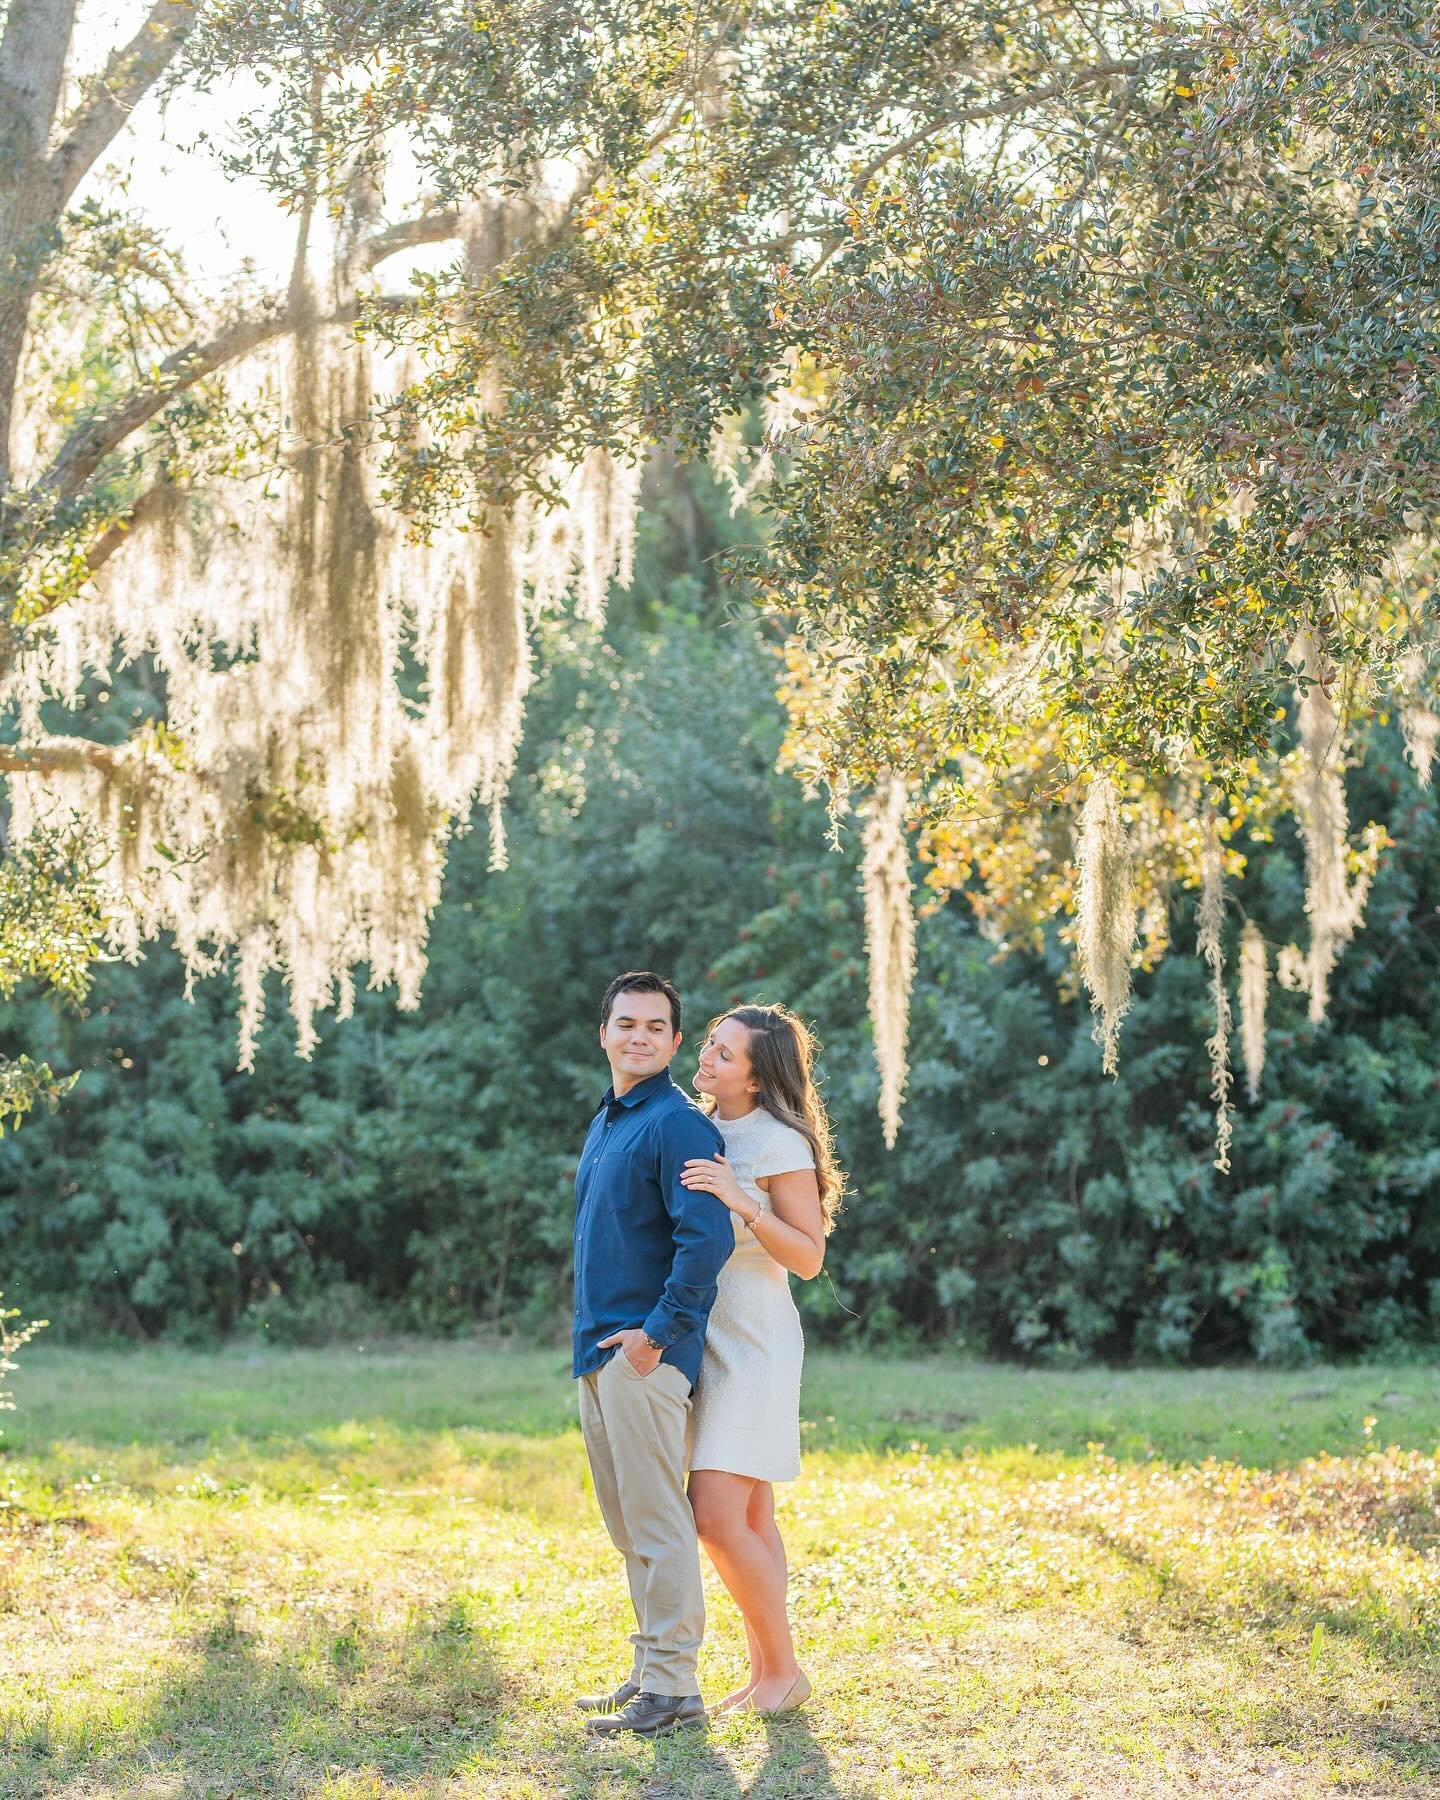 I&rsquo;ve been so busy I haven&rsquo;t been able to update my blog! I&rsquo;m happy to say that Lauren and Shawn&rsquo;s engagement session is finally on the blog!! You can check the link in bio to see this beautiful session 😍